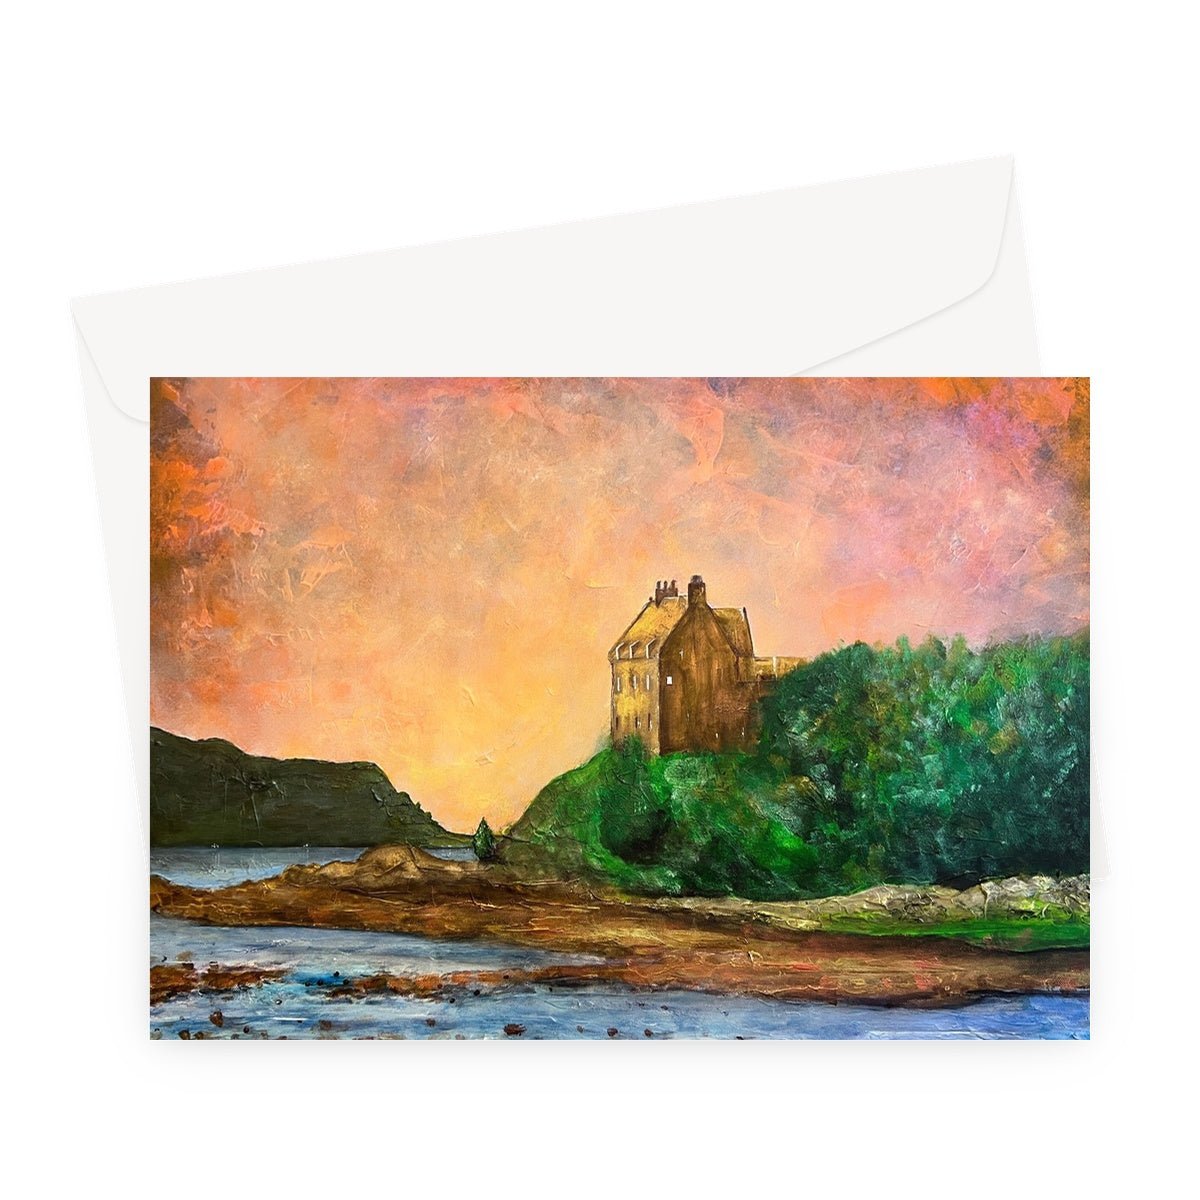 Duntrune Castle Art Gifts Greeting Card-Greetings Cards-Scottish Castles Art Gallery-A5 Landscape-1 Card-Paintings, Prints, Homeware, Art Gifts From Scotland By Scottish Artist Kevin Hunter